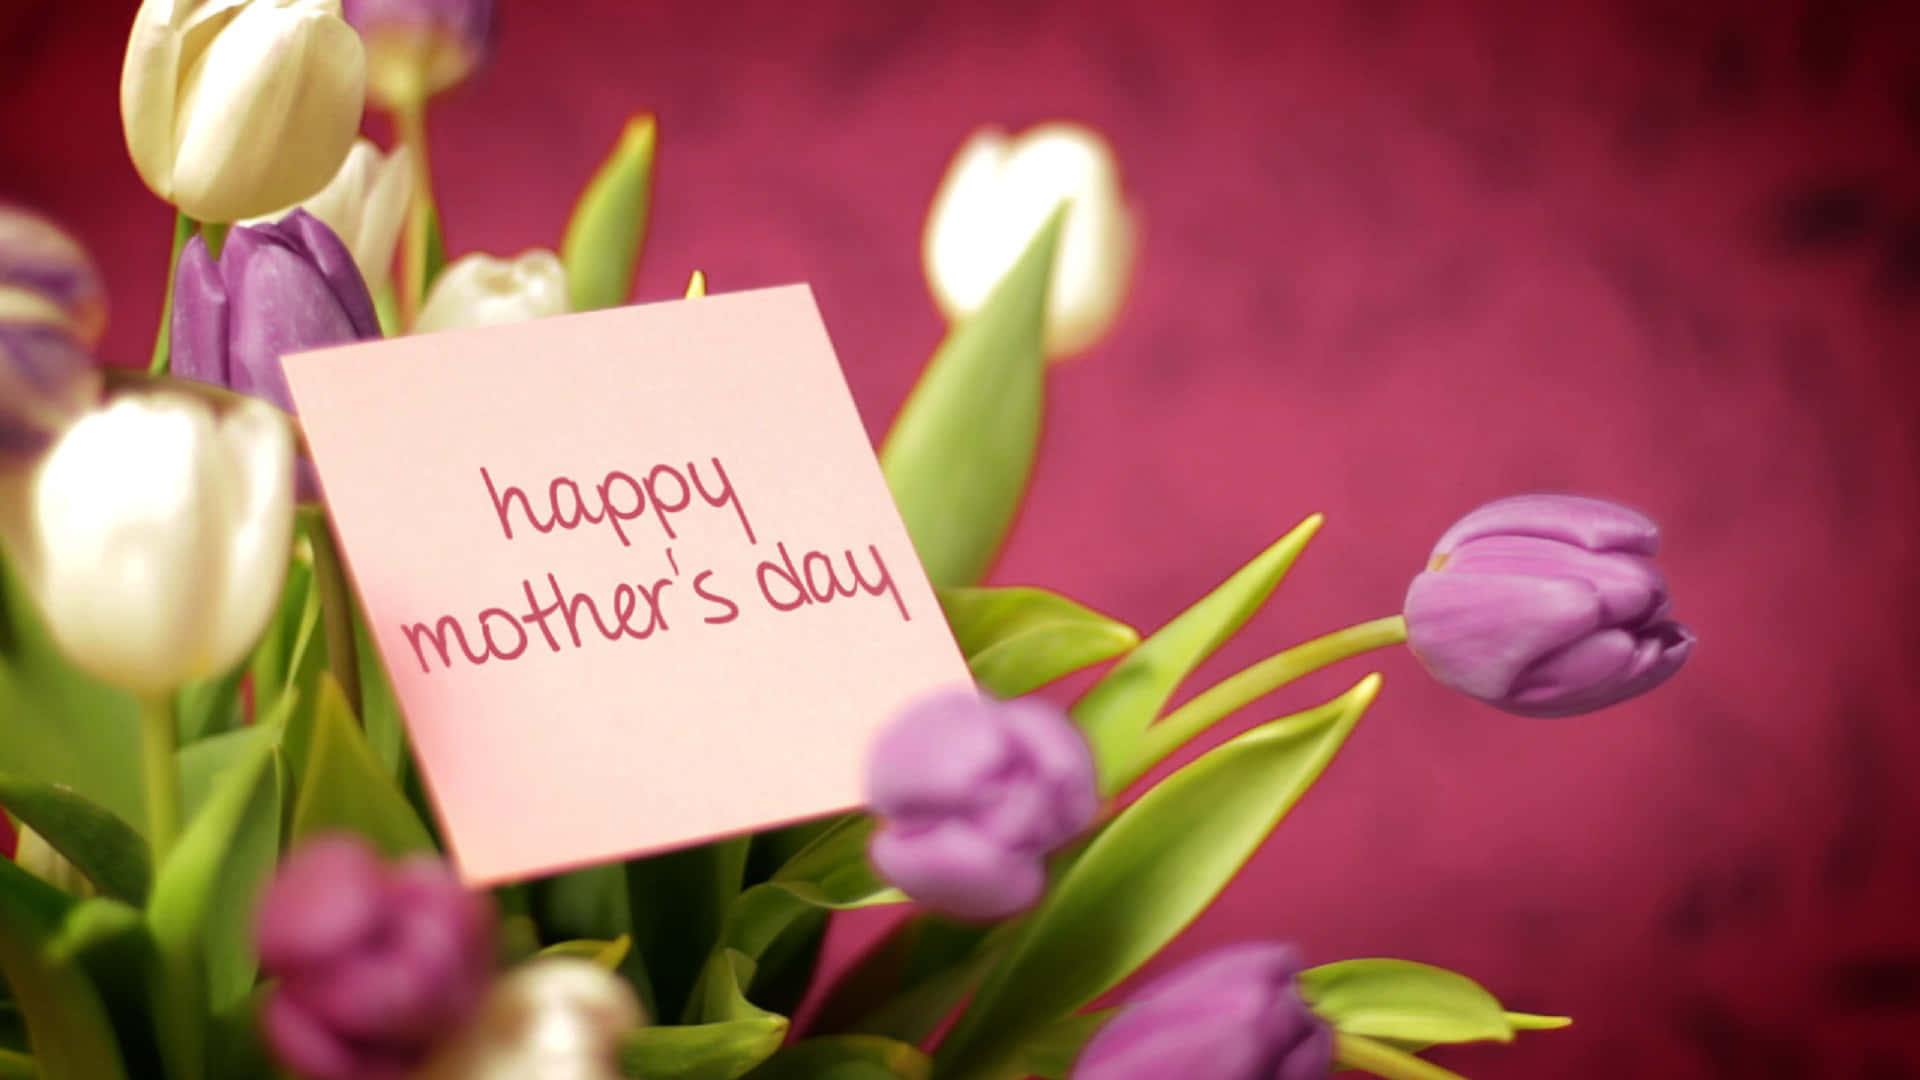 Happy Mothers Day Red And White Tulips Hd Wallpaper